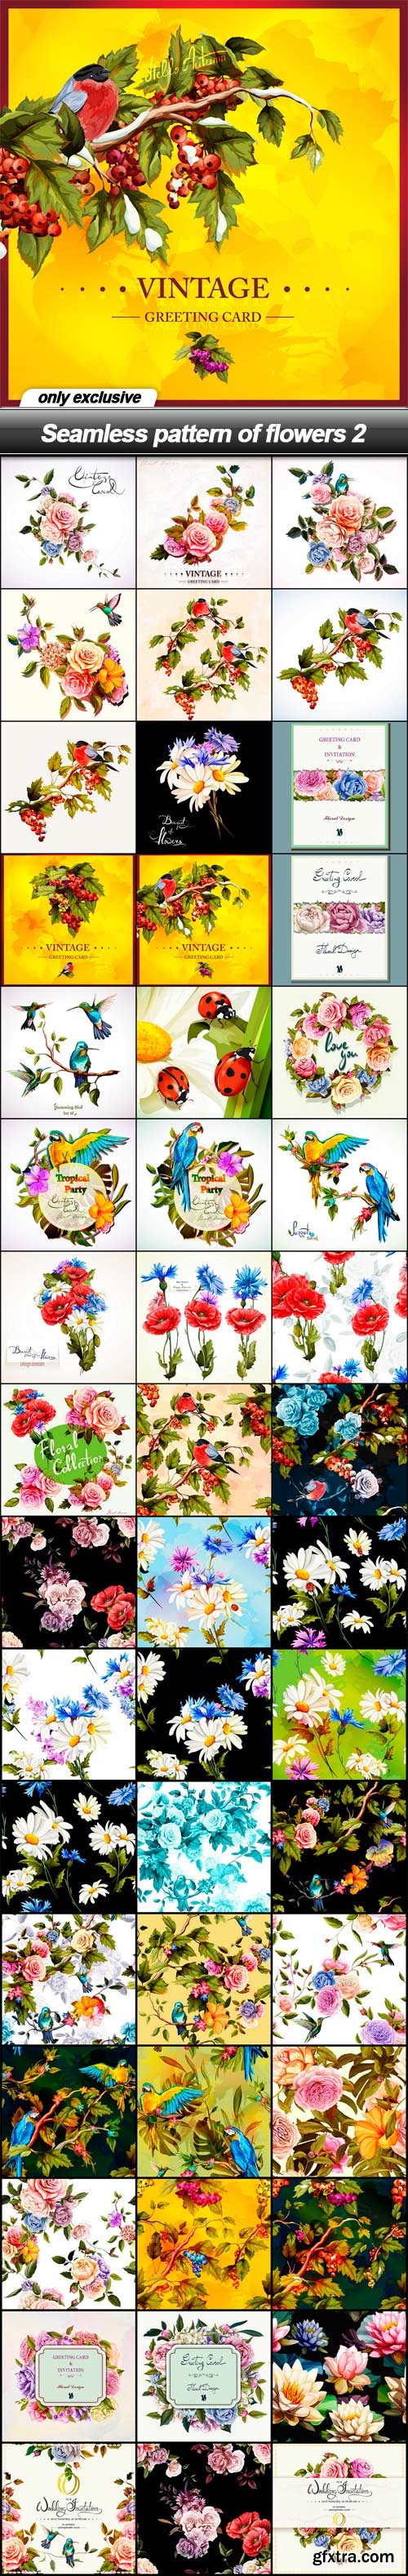 Seamless pattern of flowers 2 - 47 EPS